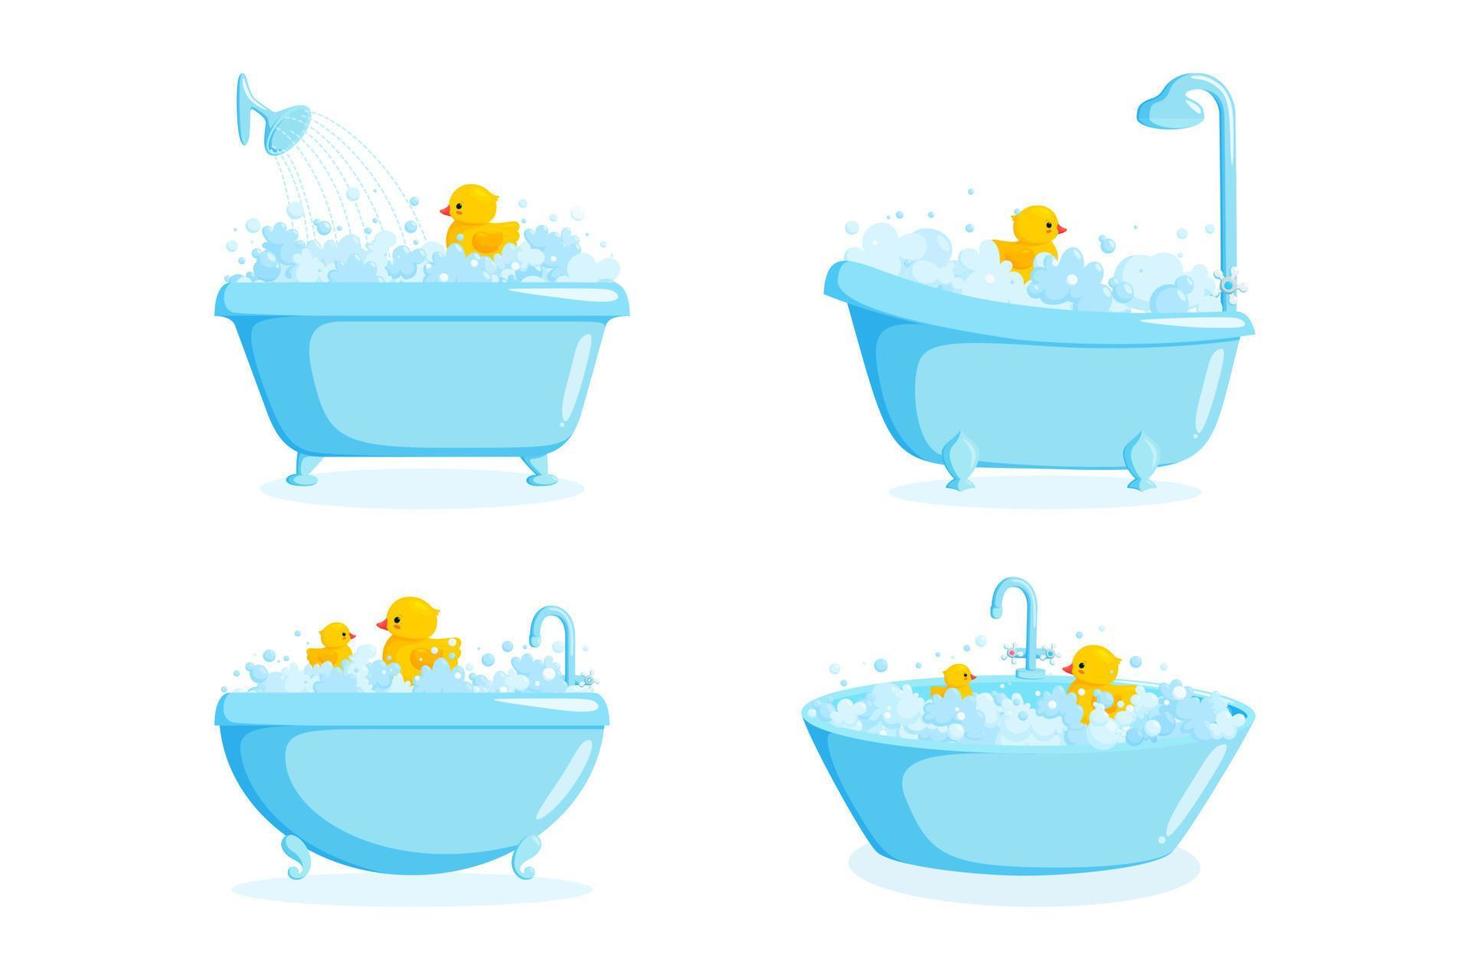 Bathtub with faucet and shower equipment. Set of different tubs with rubber ducks, bubbles and suds isolated on white background. Vector illustration